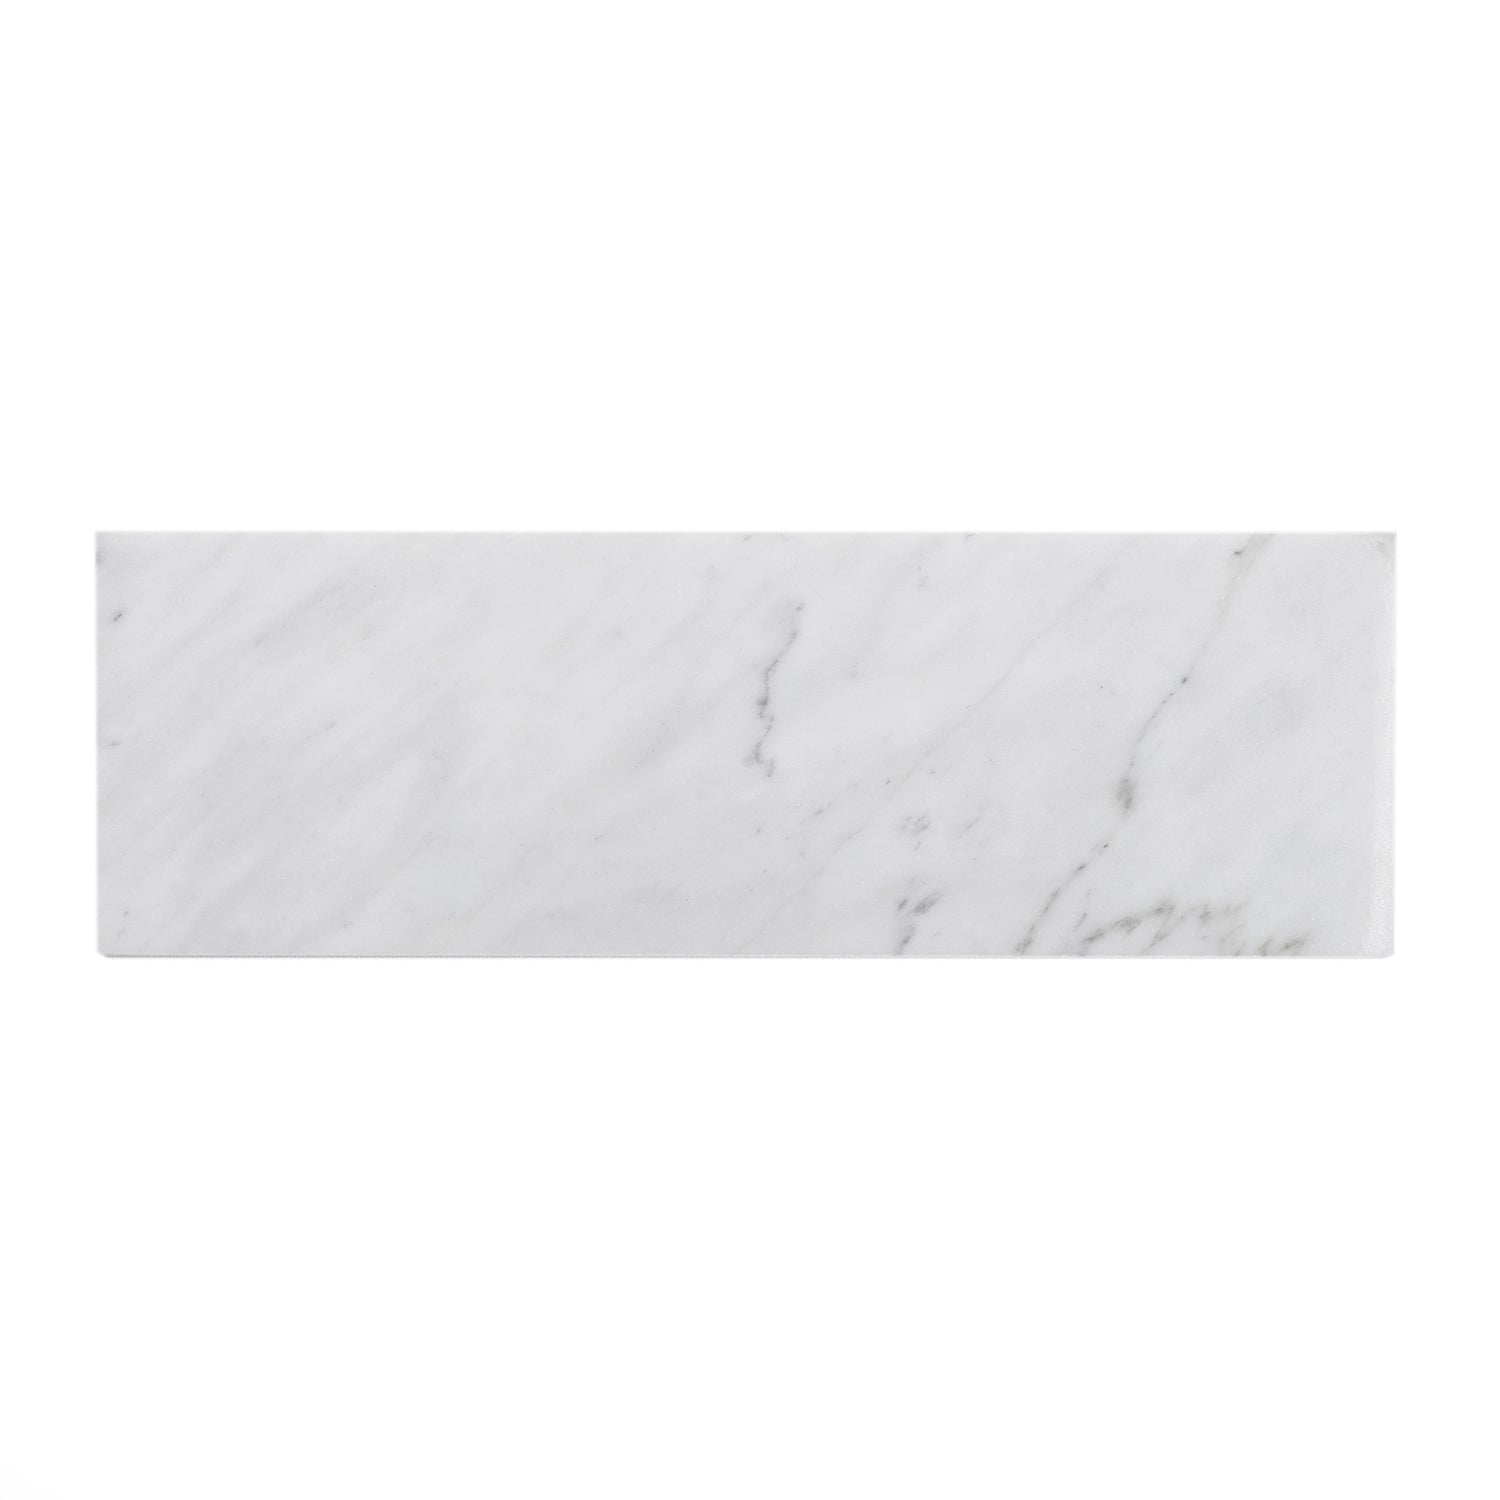 Clean White & Gray Marble Tile